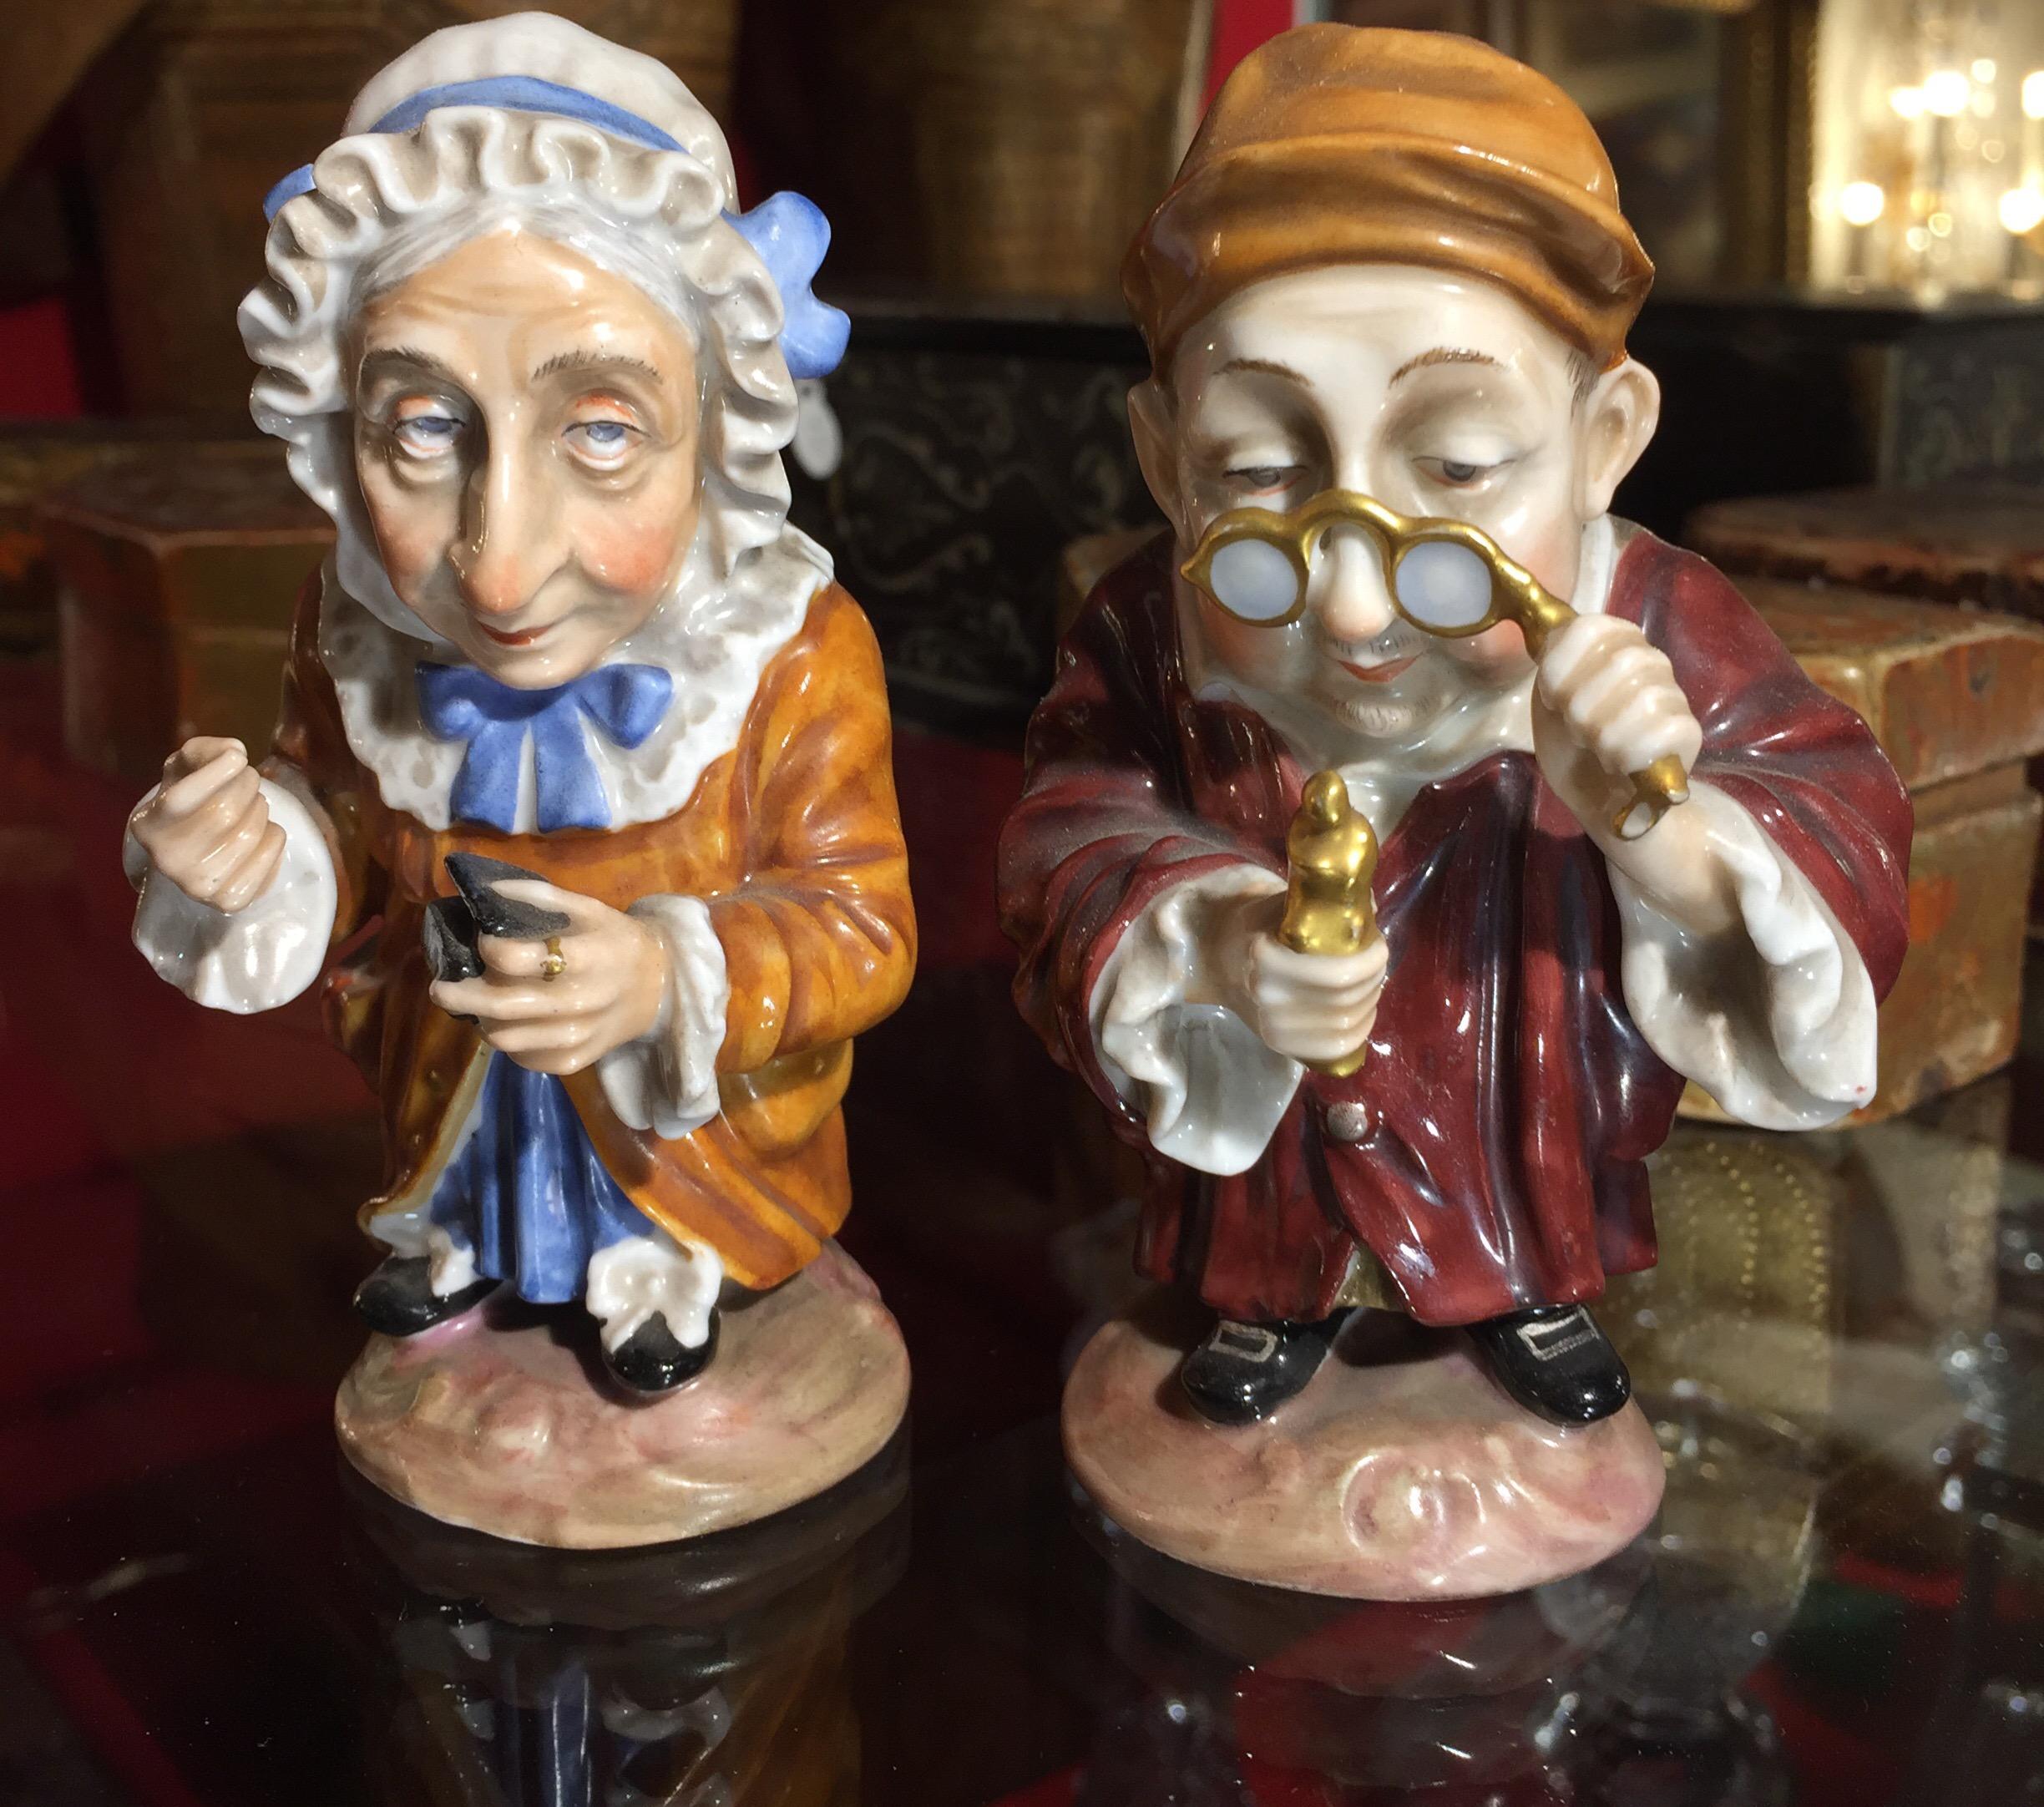 Exclusive and rare Italian Doccia Ginori porcelain pair of Dwarfs or two old persons represented as grotesque figures. These small sculptures inspired from a series of drawings by Jacques Callot’s entitled, “Grosteque Dwarves” dating back to